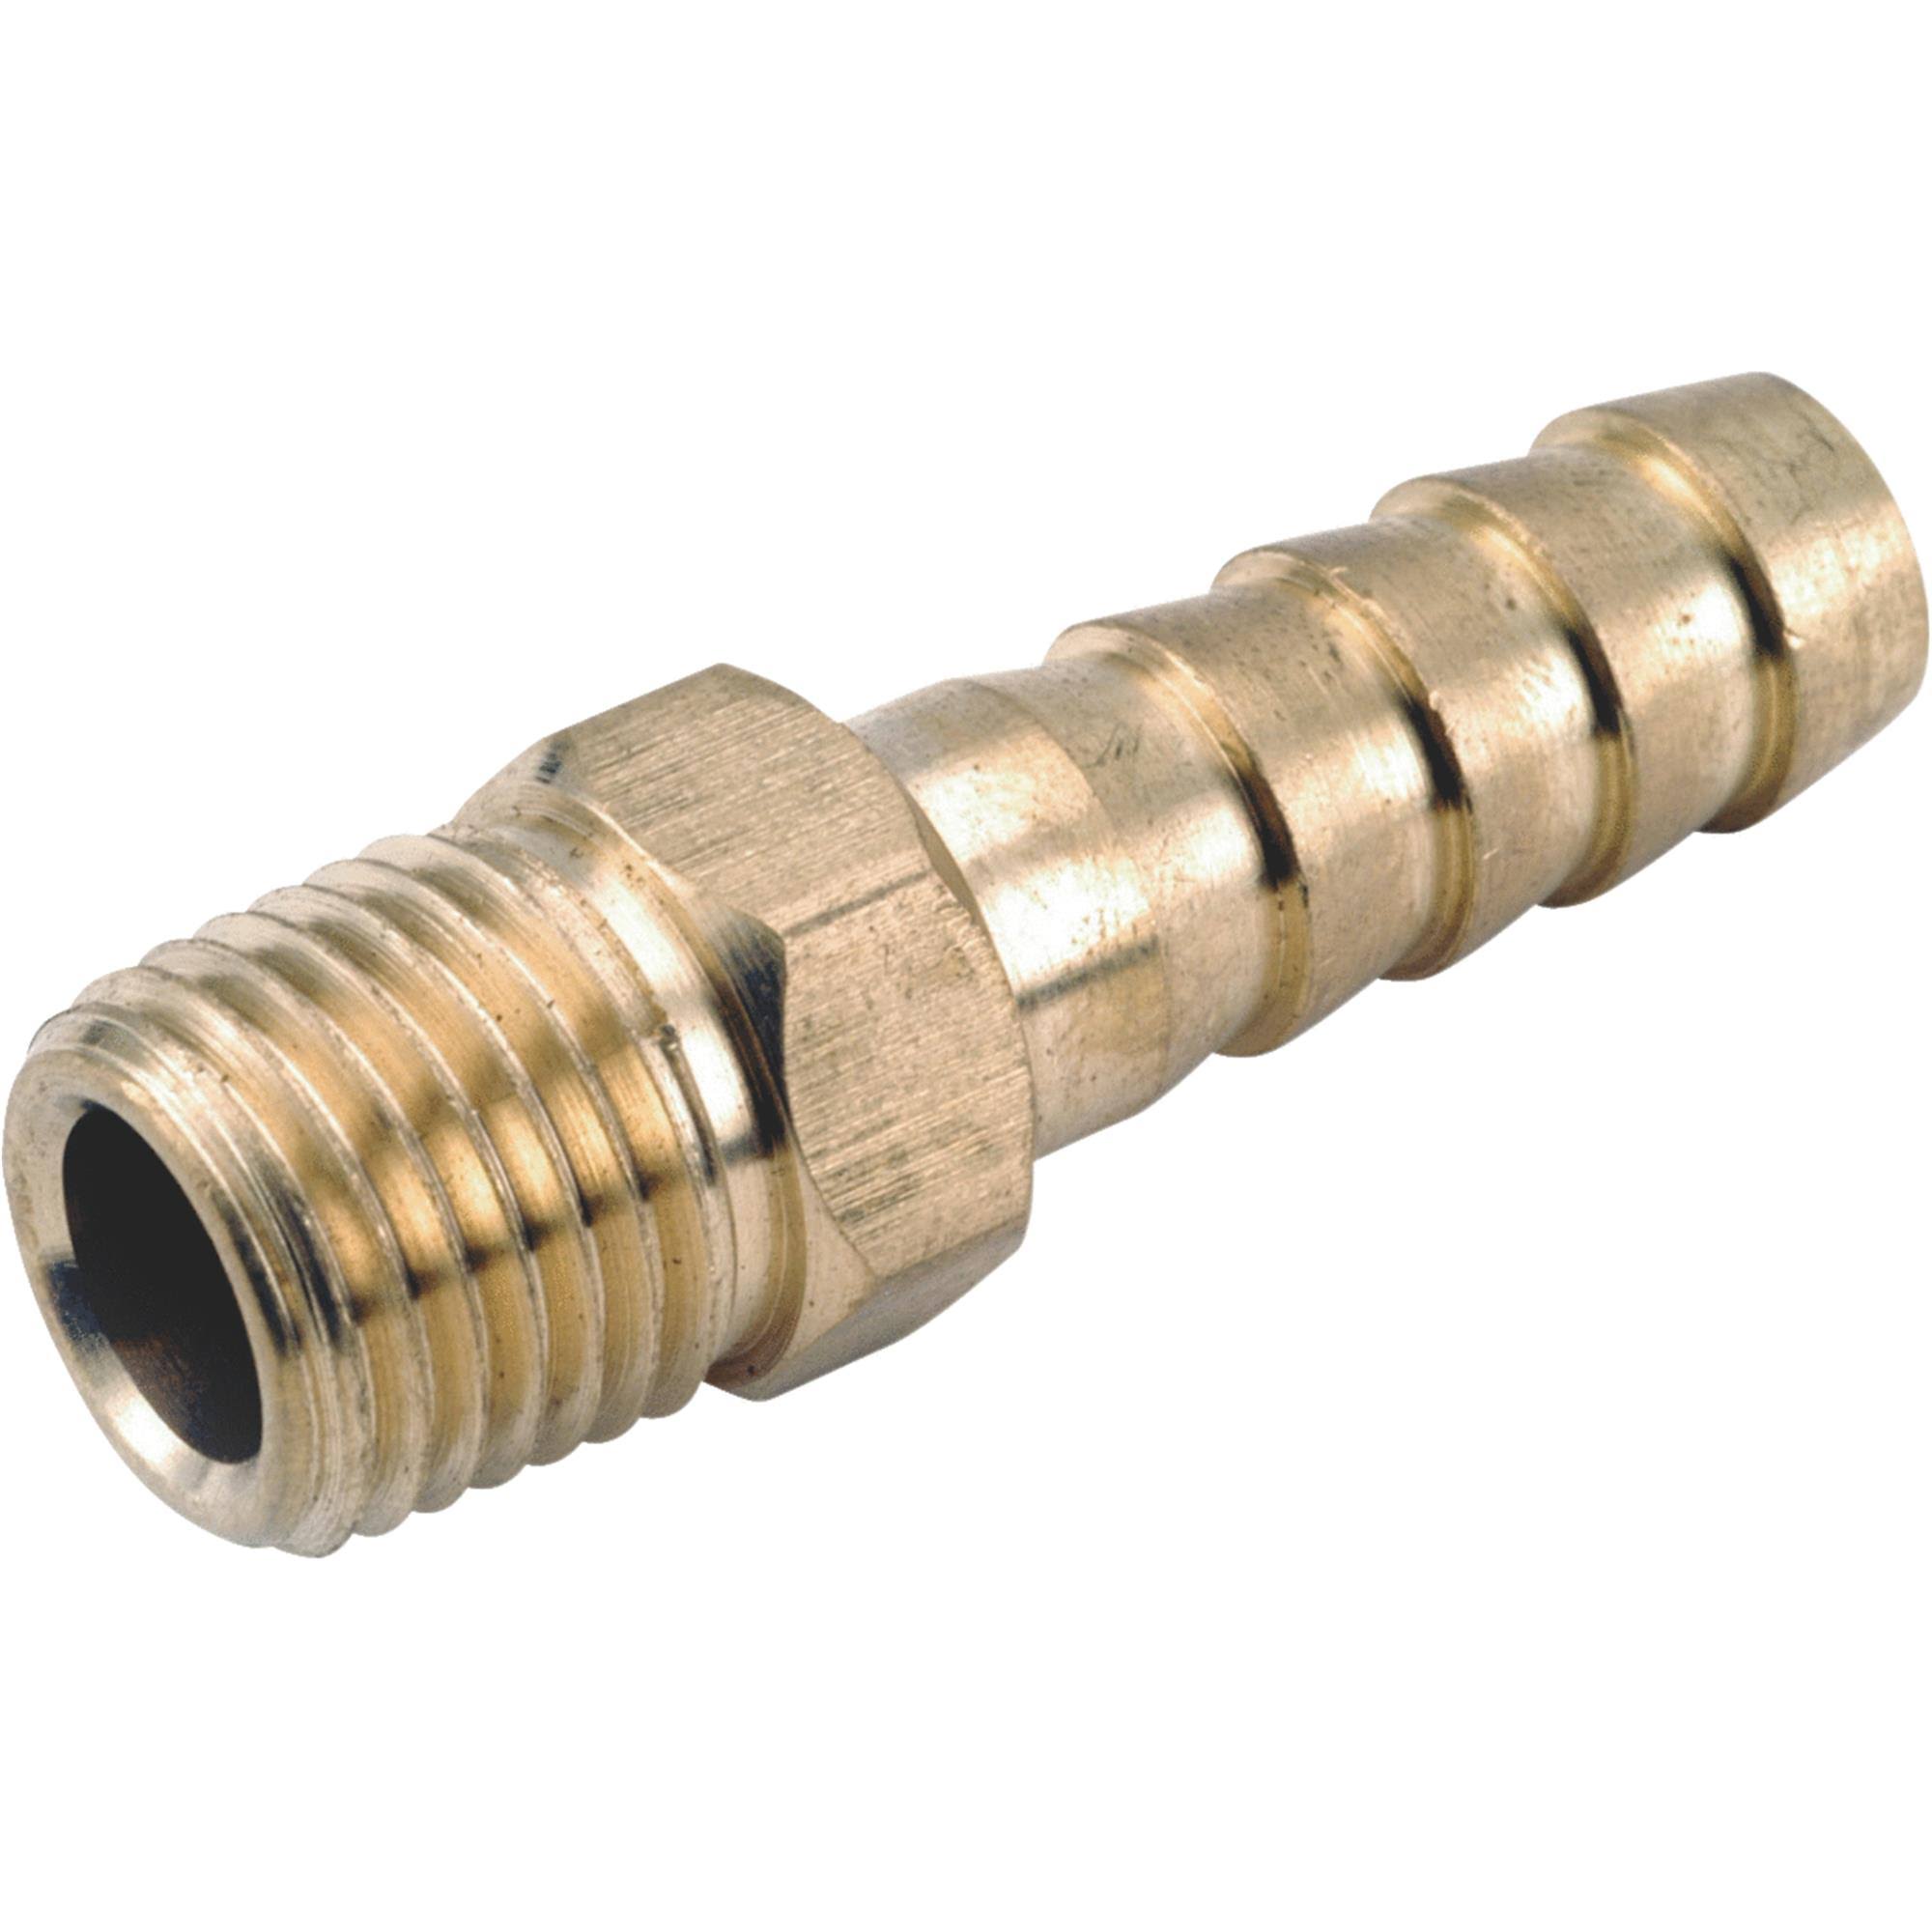 Anderson Metal Male Hose Adapter - 5/8" x 1/2''